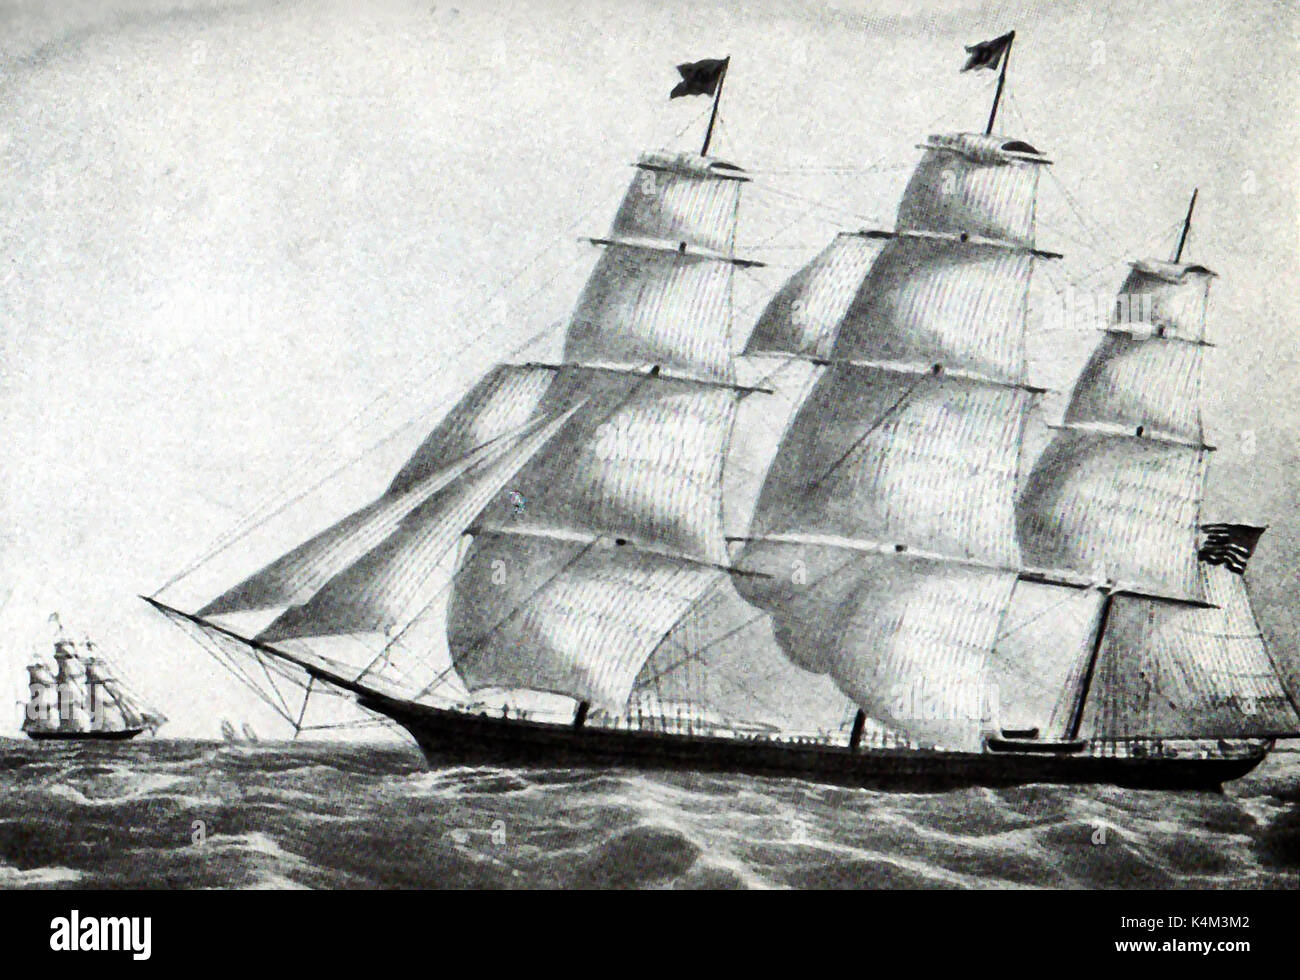 The clipper ship (windjammer)  YOUNG AMERICA  built by William H. Webb and owned by George Daniels. Captained for many years by  David Babcock. Stock Photo